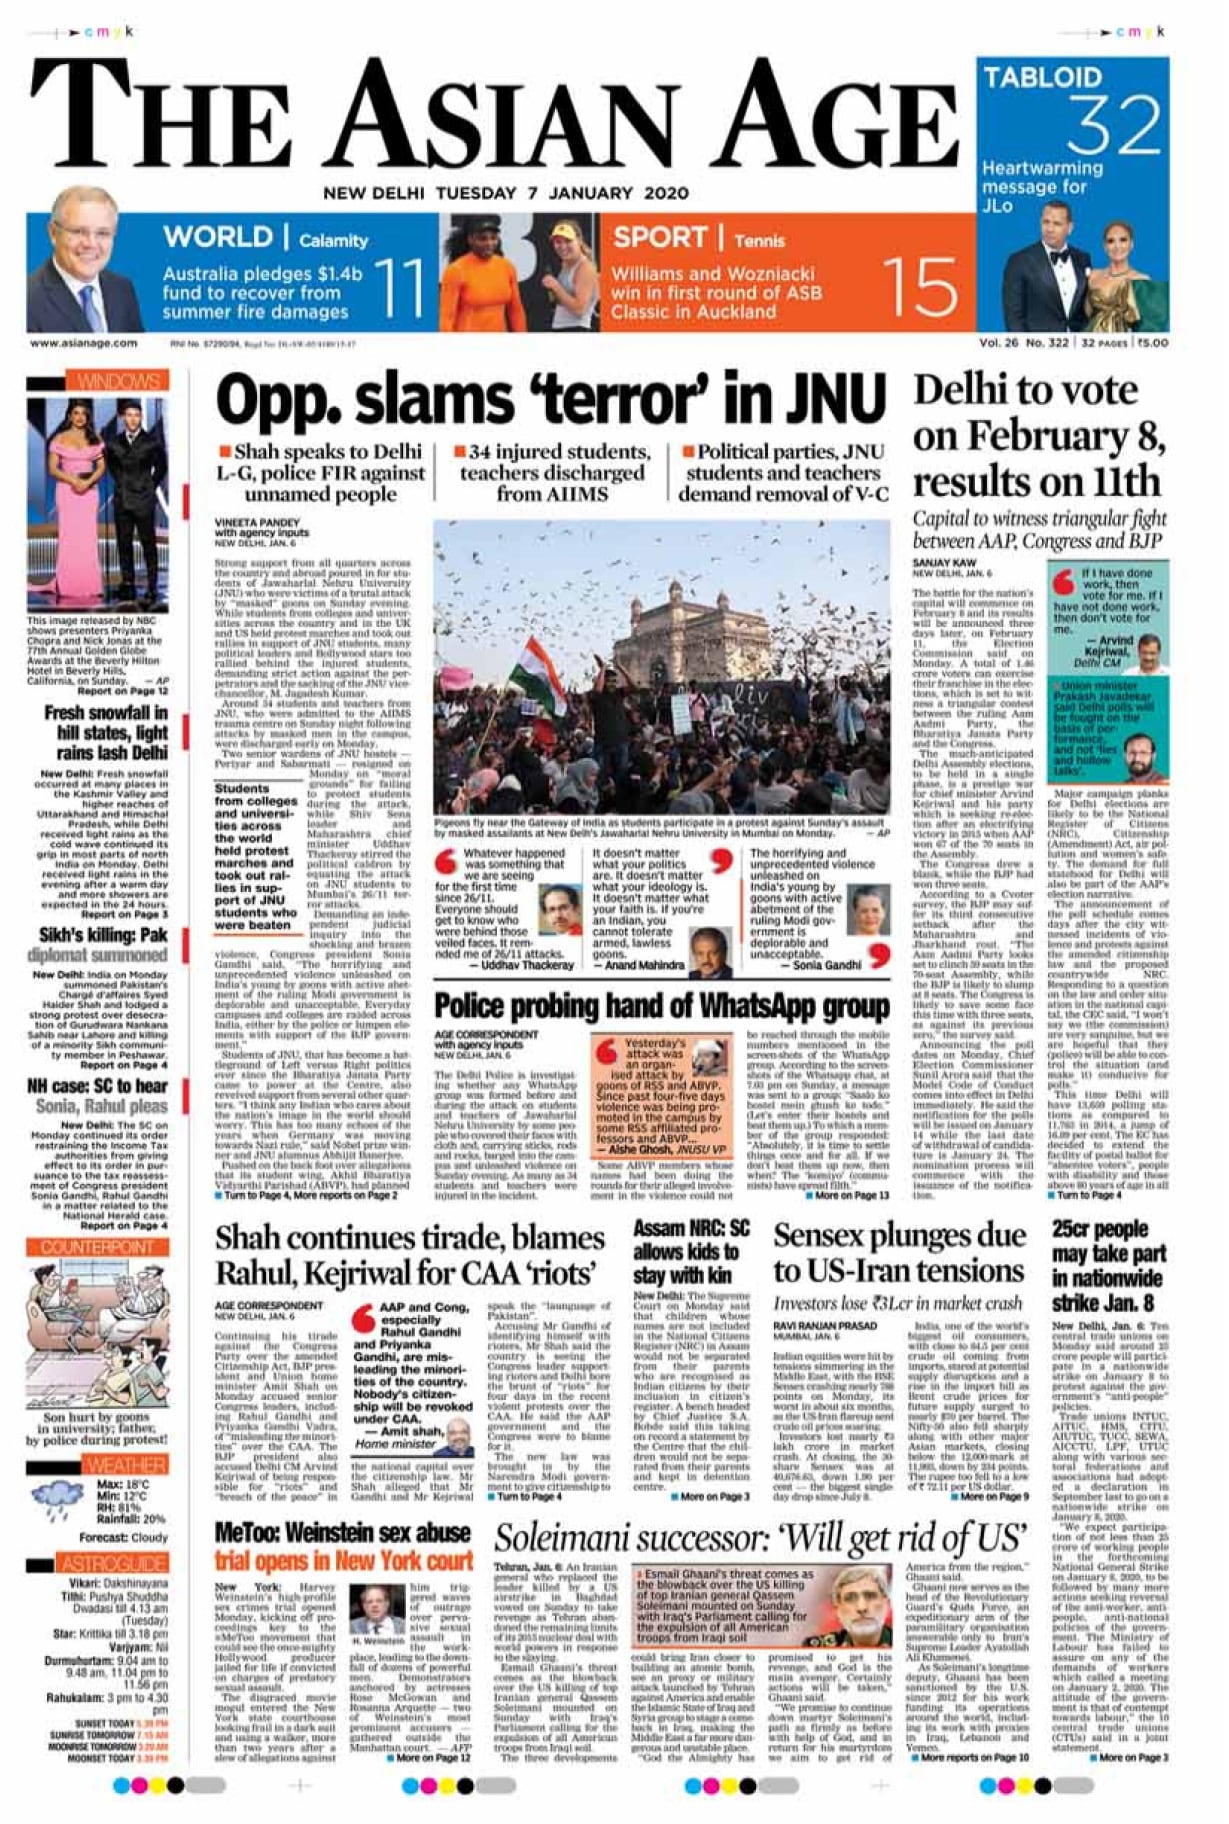 Newspaper Headlines: Nation Reacts To JNU Mob Attack, US-Iran Tensions Continue